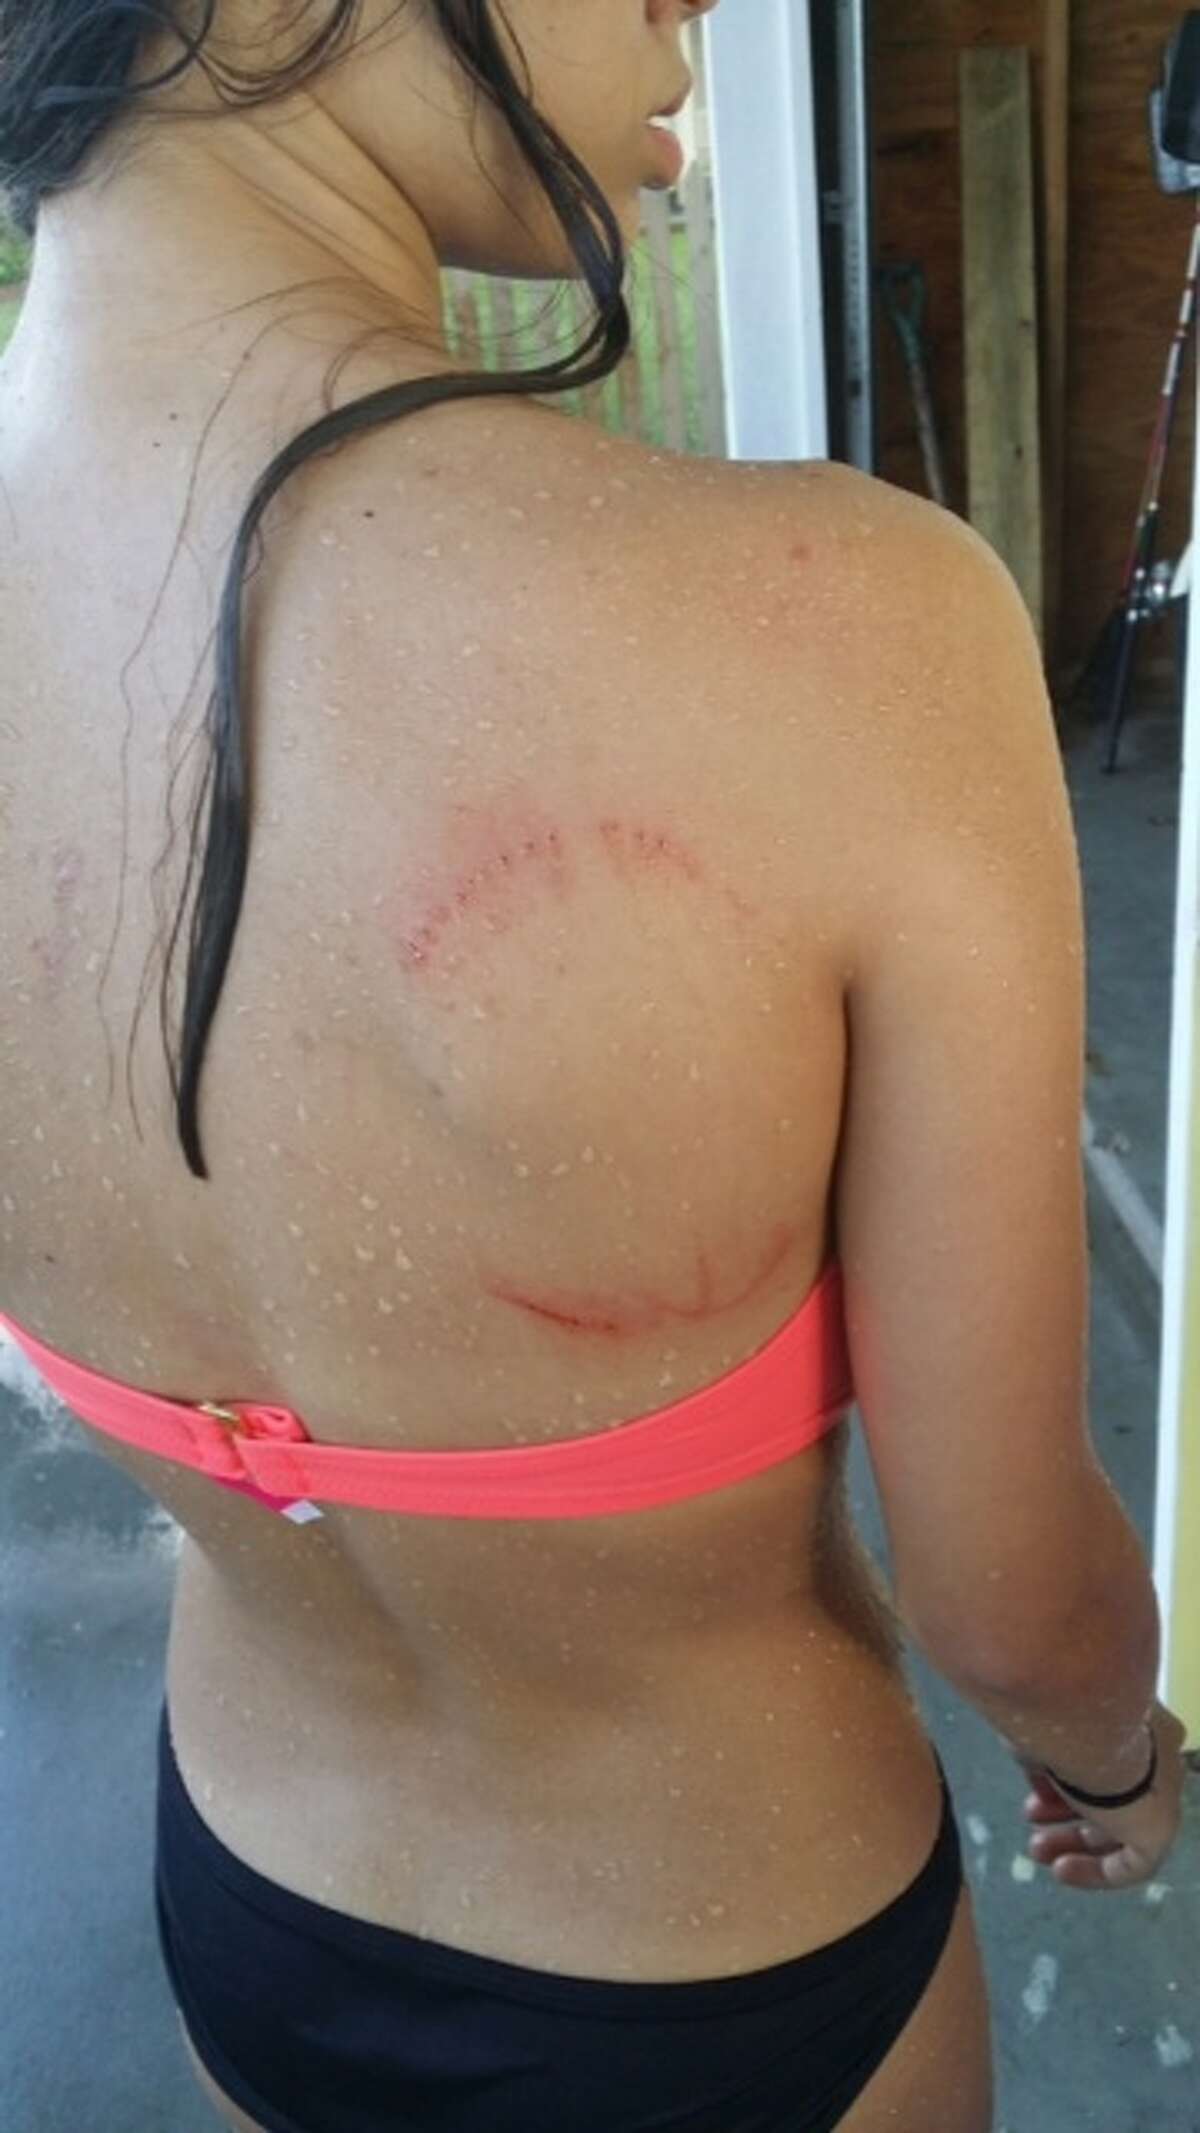 Bellaire teenager Mikaela Amezaga displays bite marks she believes were caused by a shark while she was swimming in Galveston.